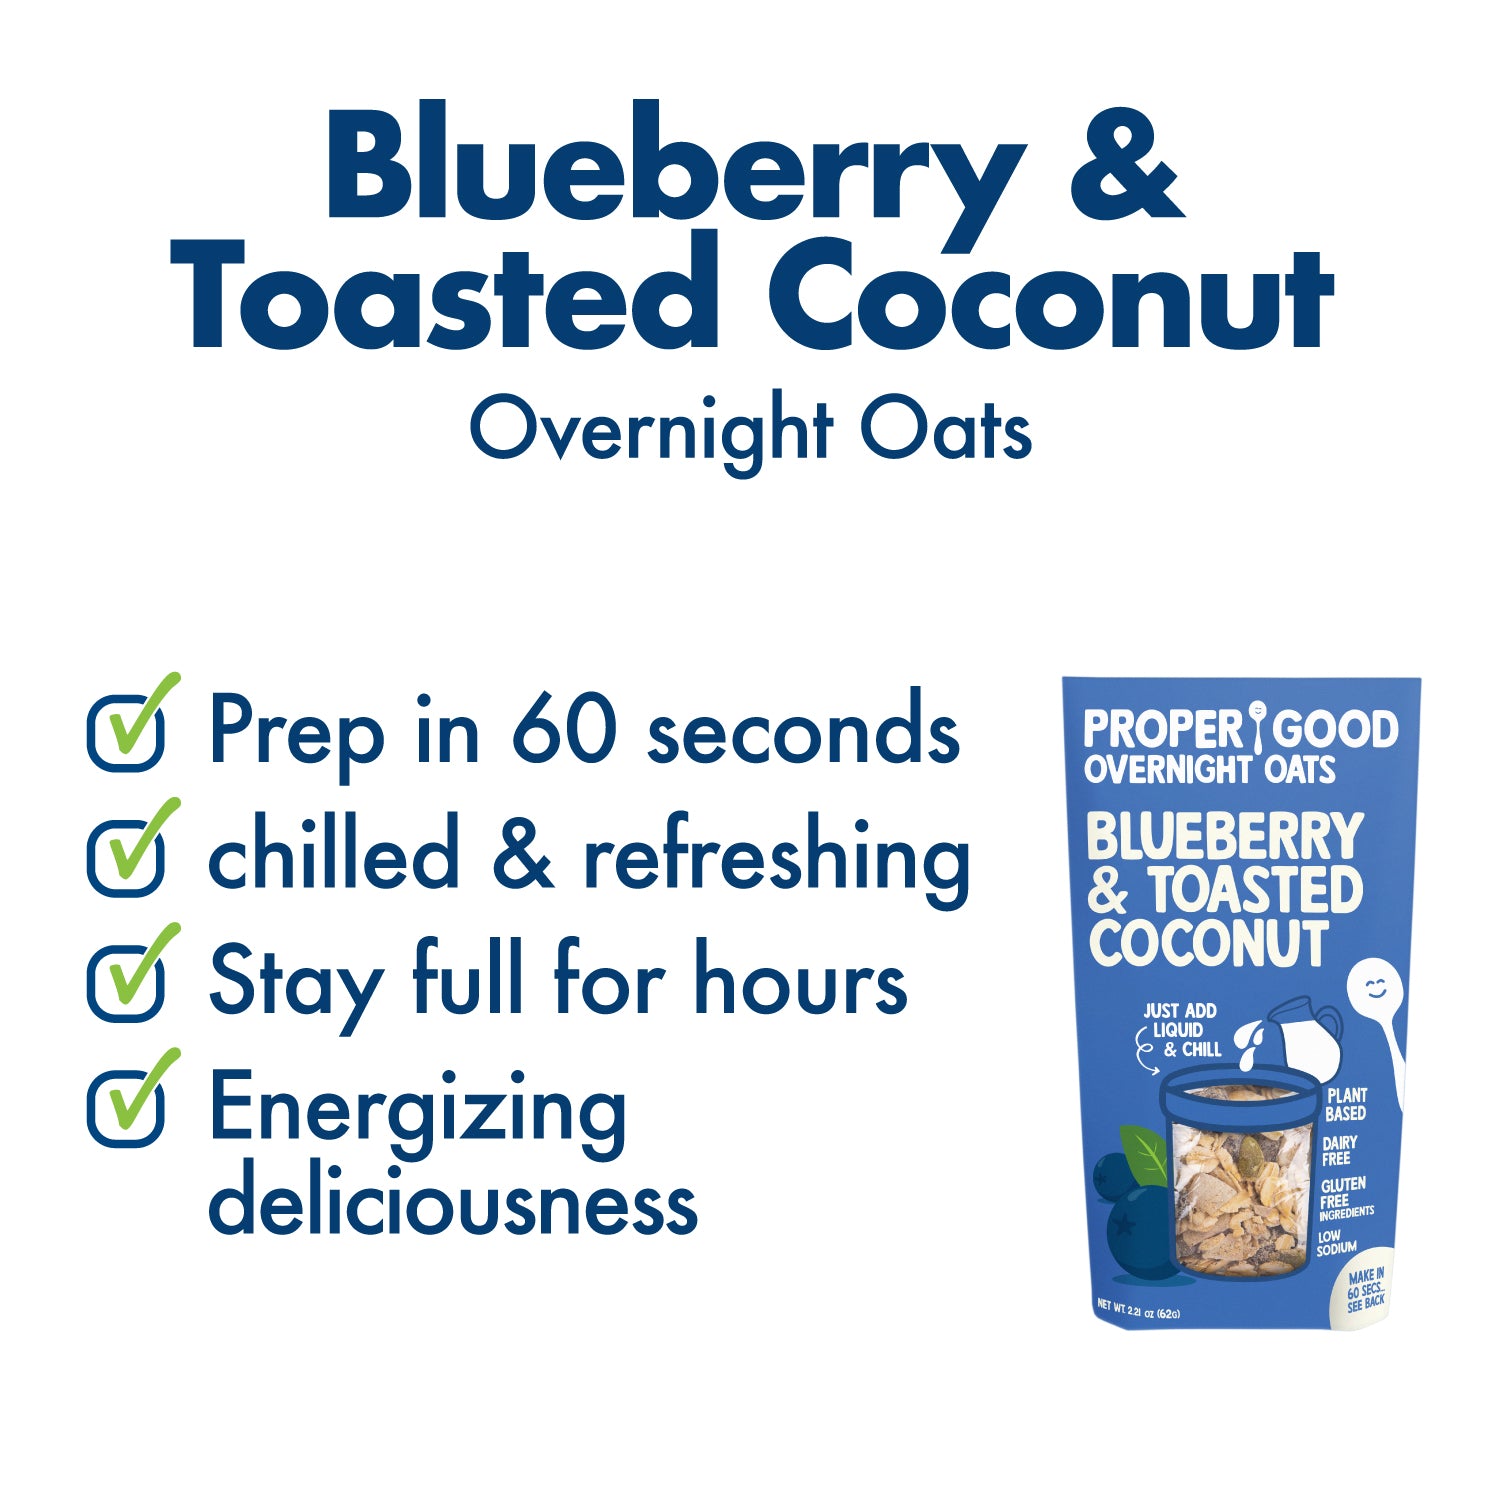 Blueberry & Toasted Coconut Overnight Oats Benefits - Eat Proper Good